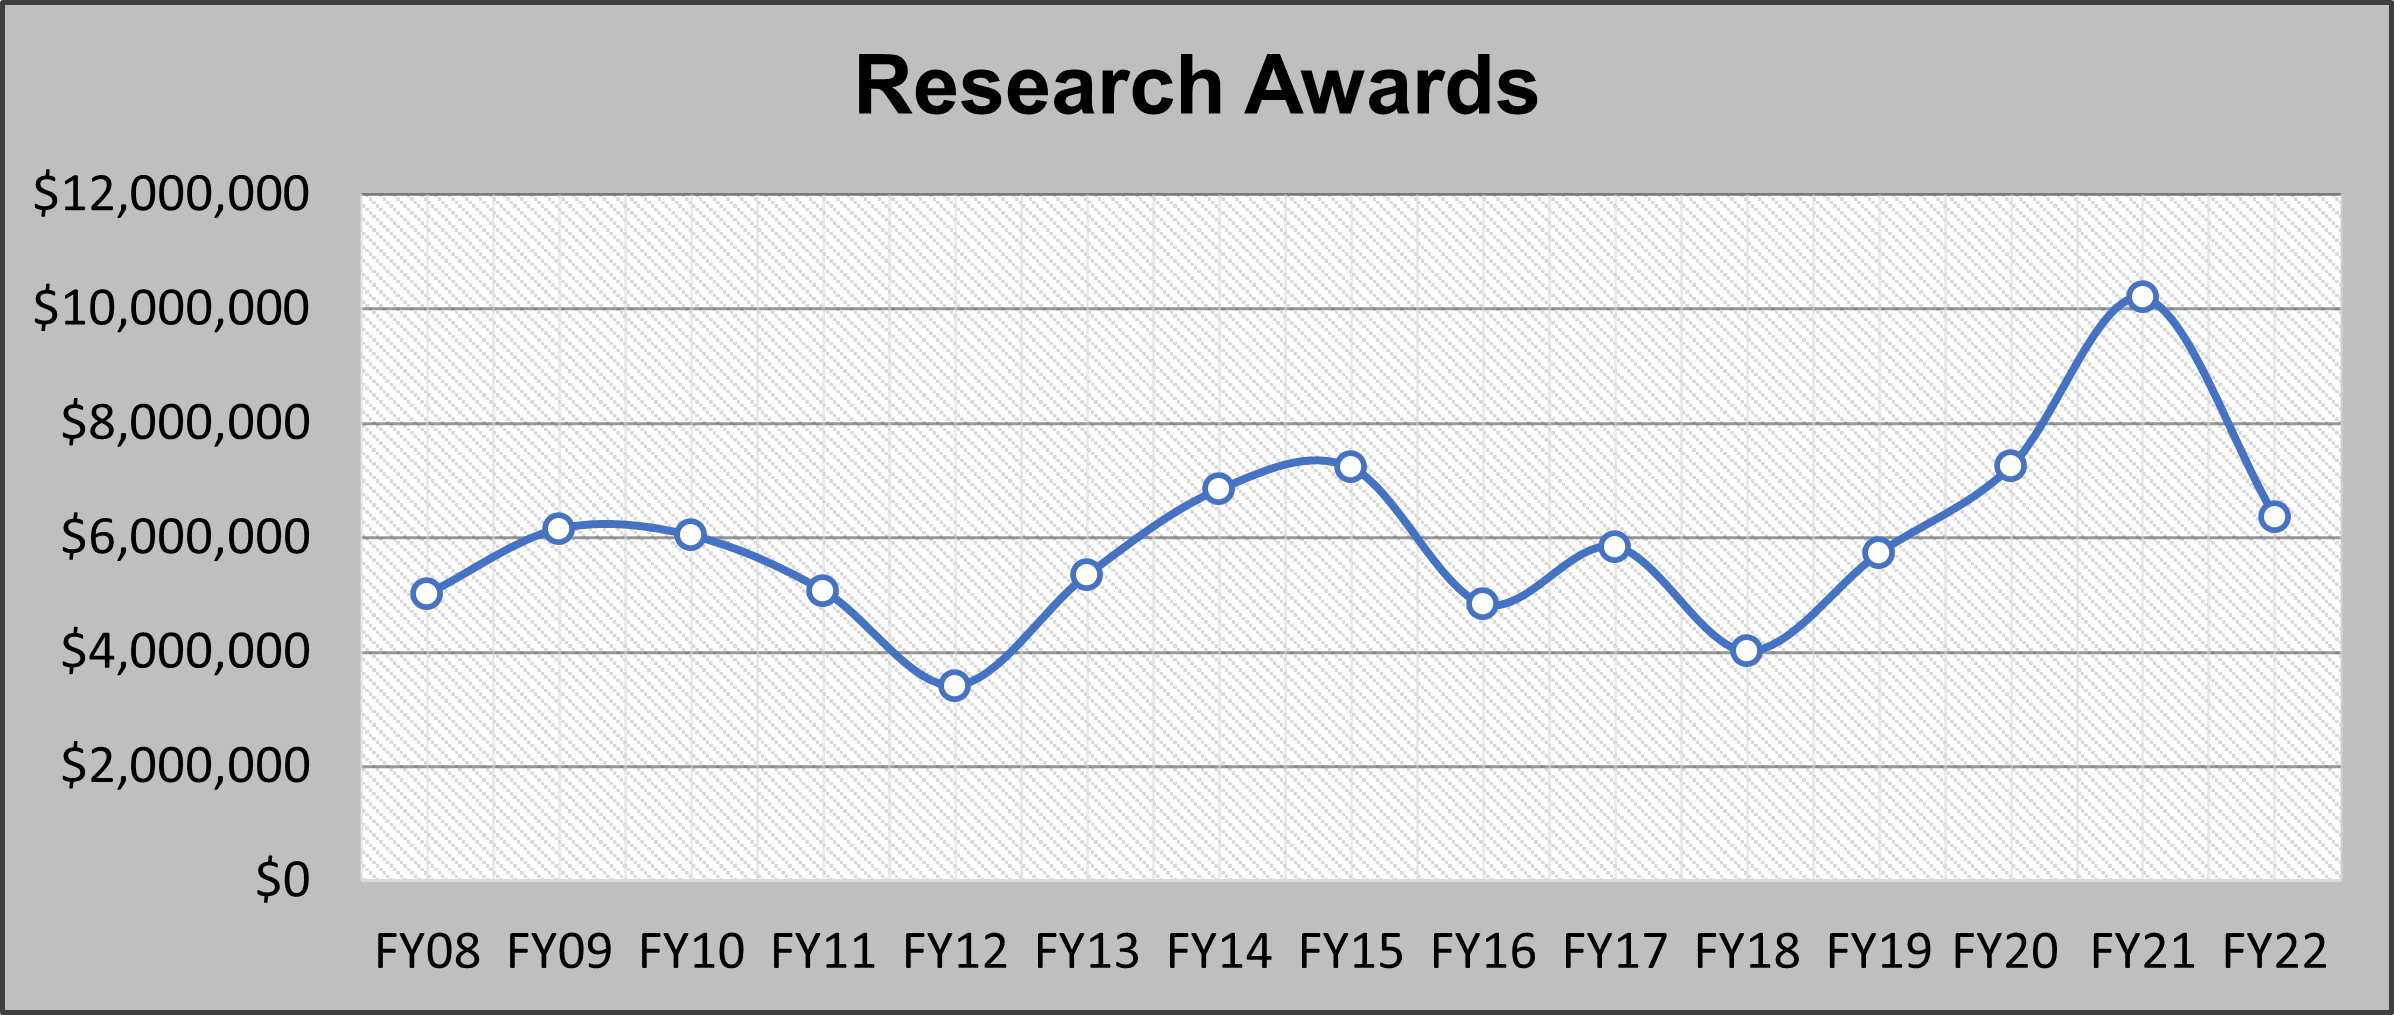 Chart of New Research Awards from FY08 to FY22